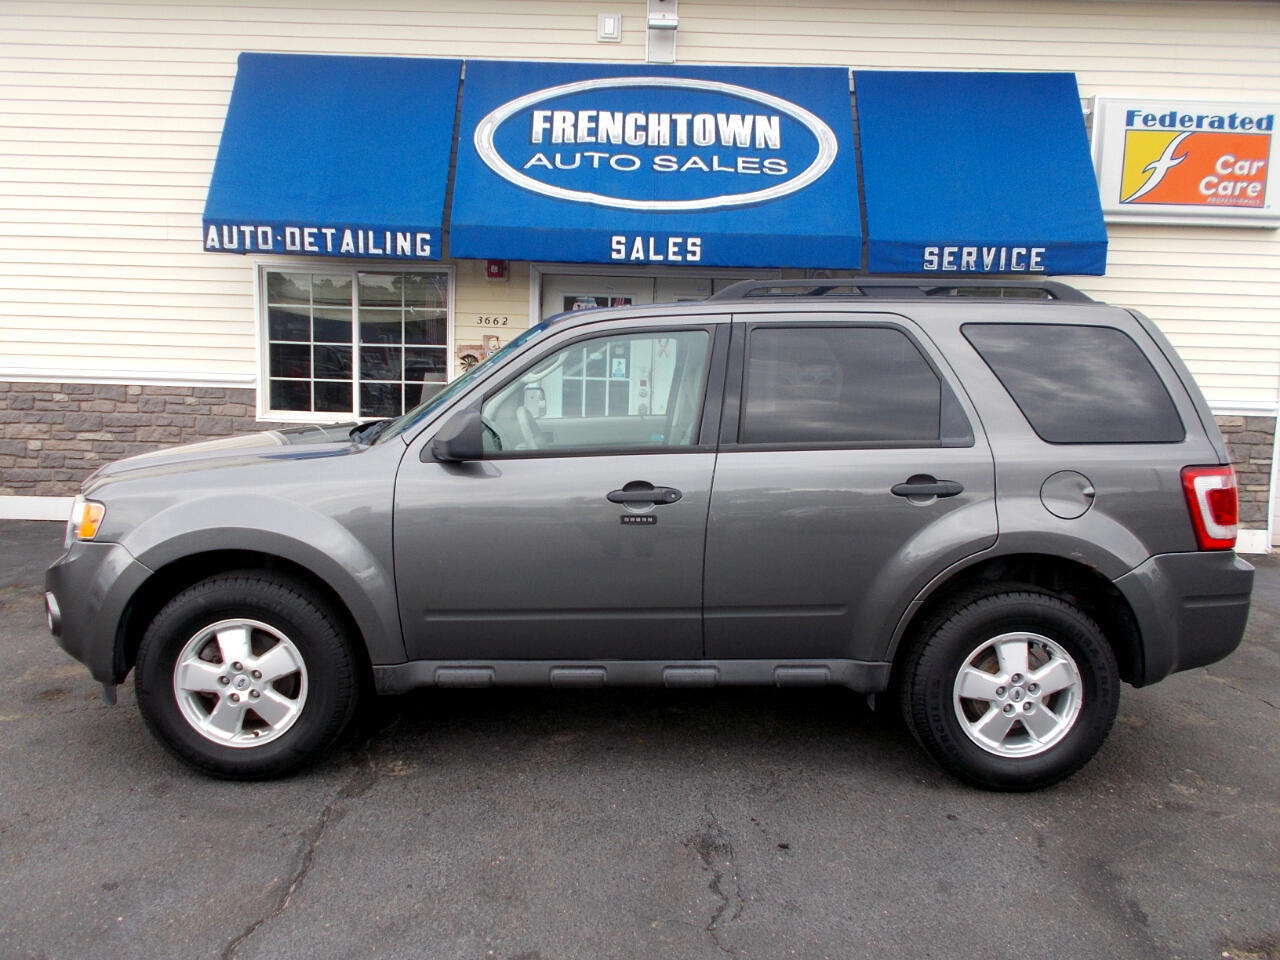 Used 2012 Ford Escape XLT FWD for Sale in North Kingstown RI 02852 ...